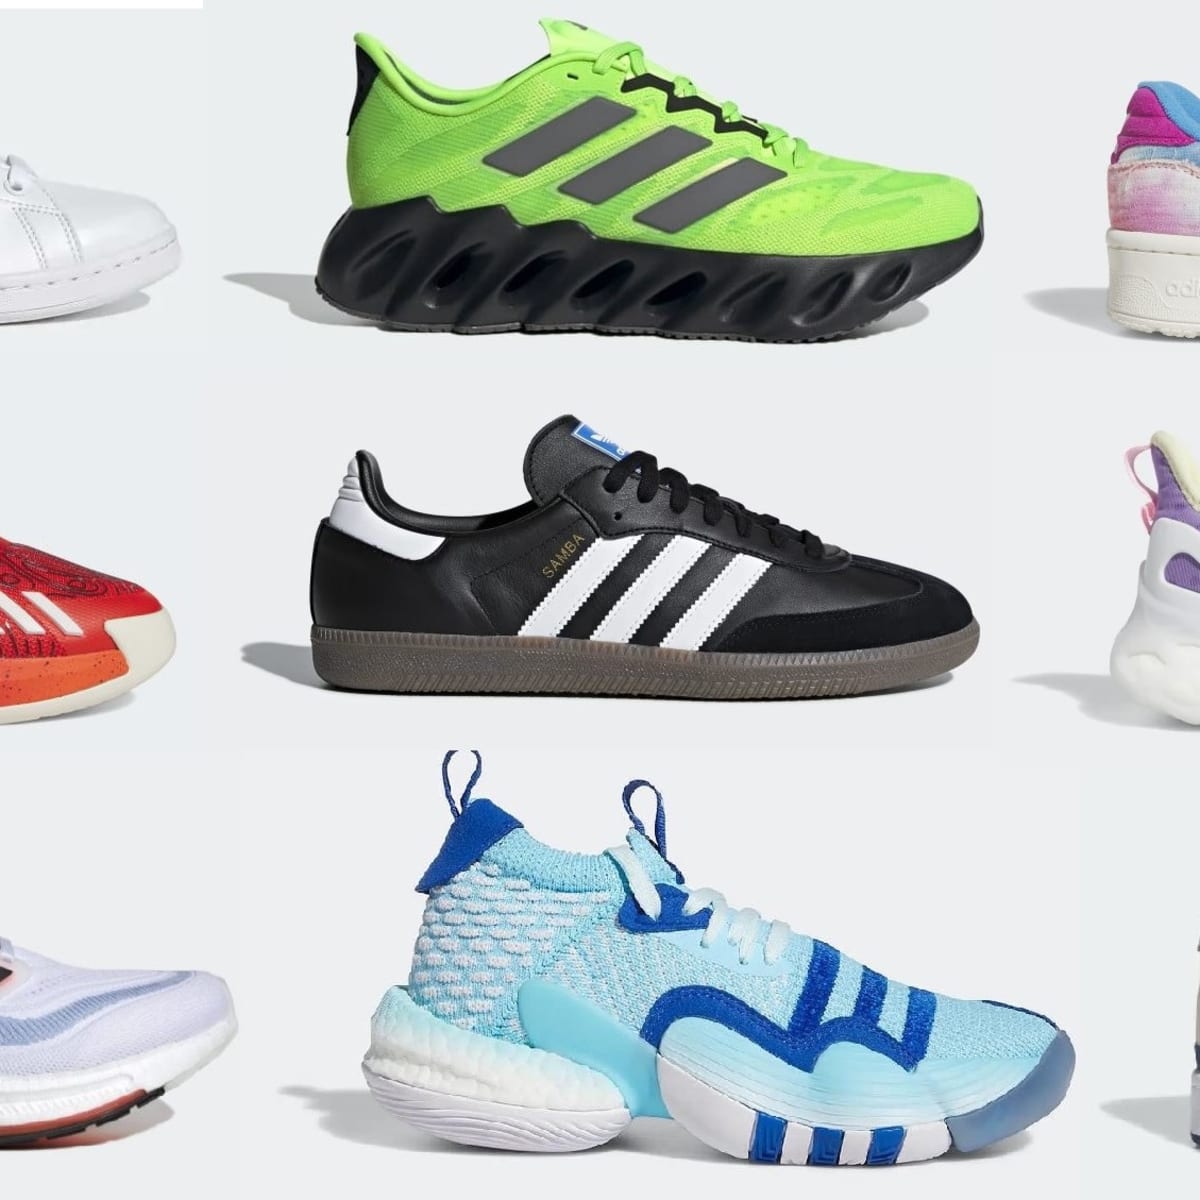 25 Top Adidas Best Selling Shoes and Sneakers